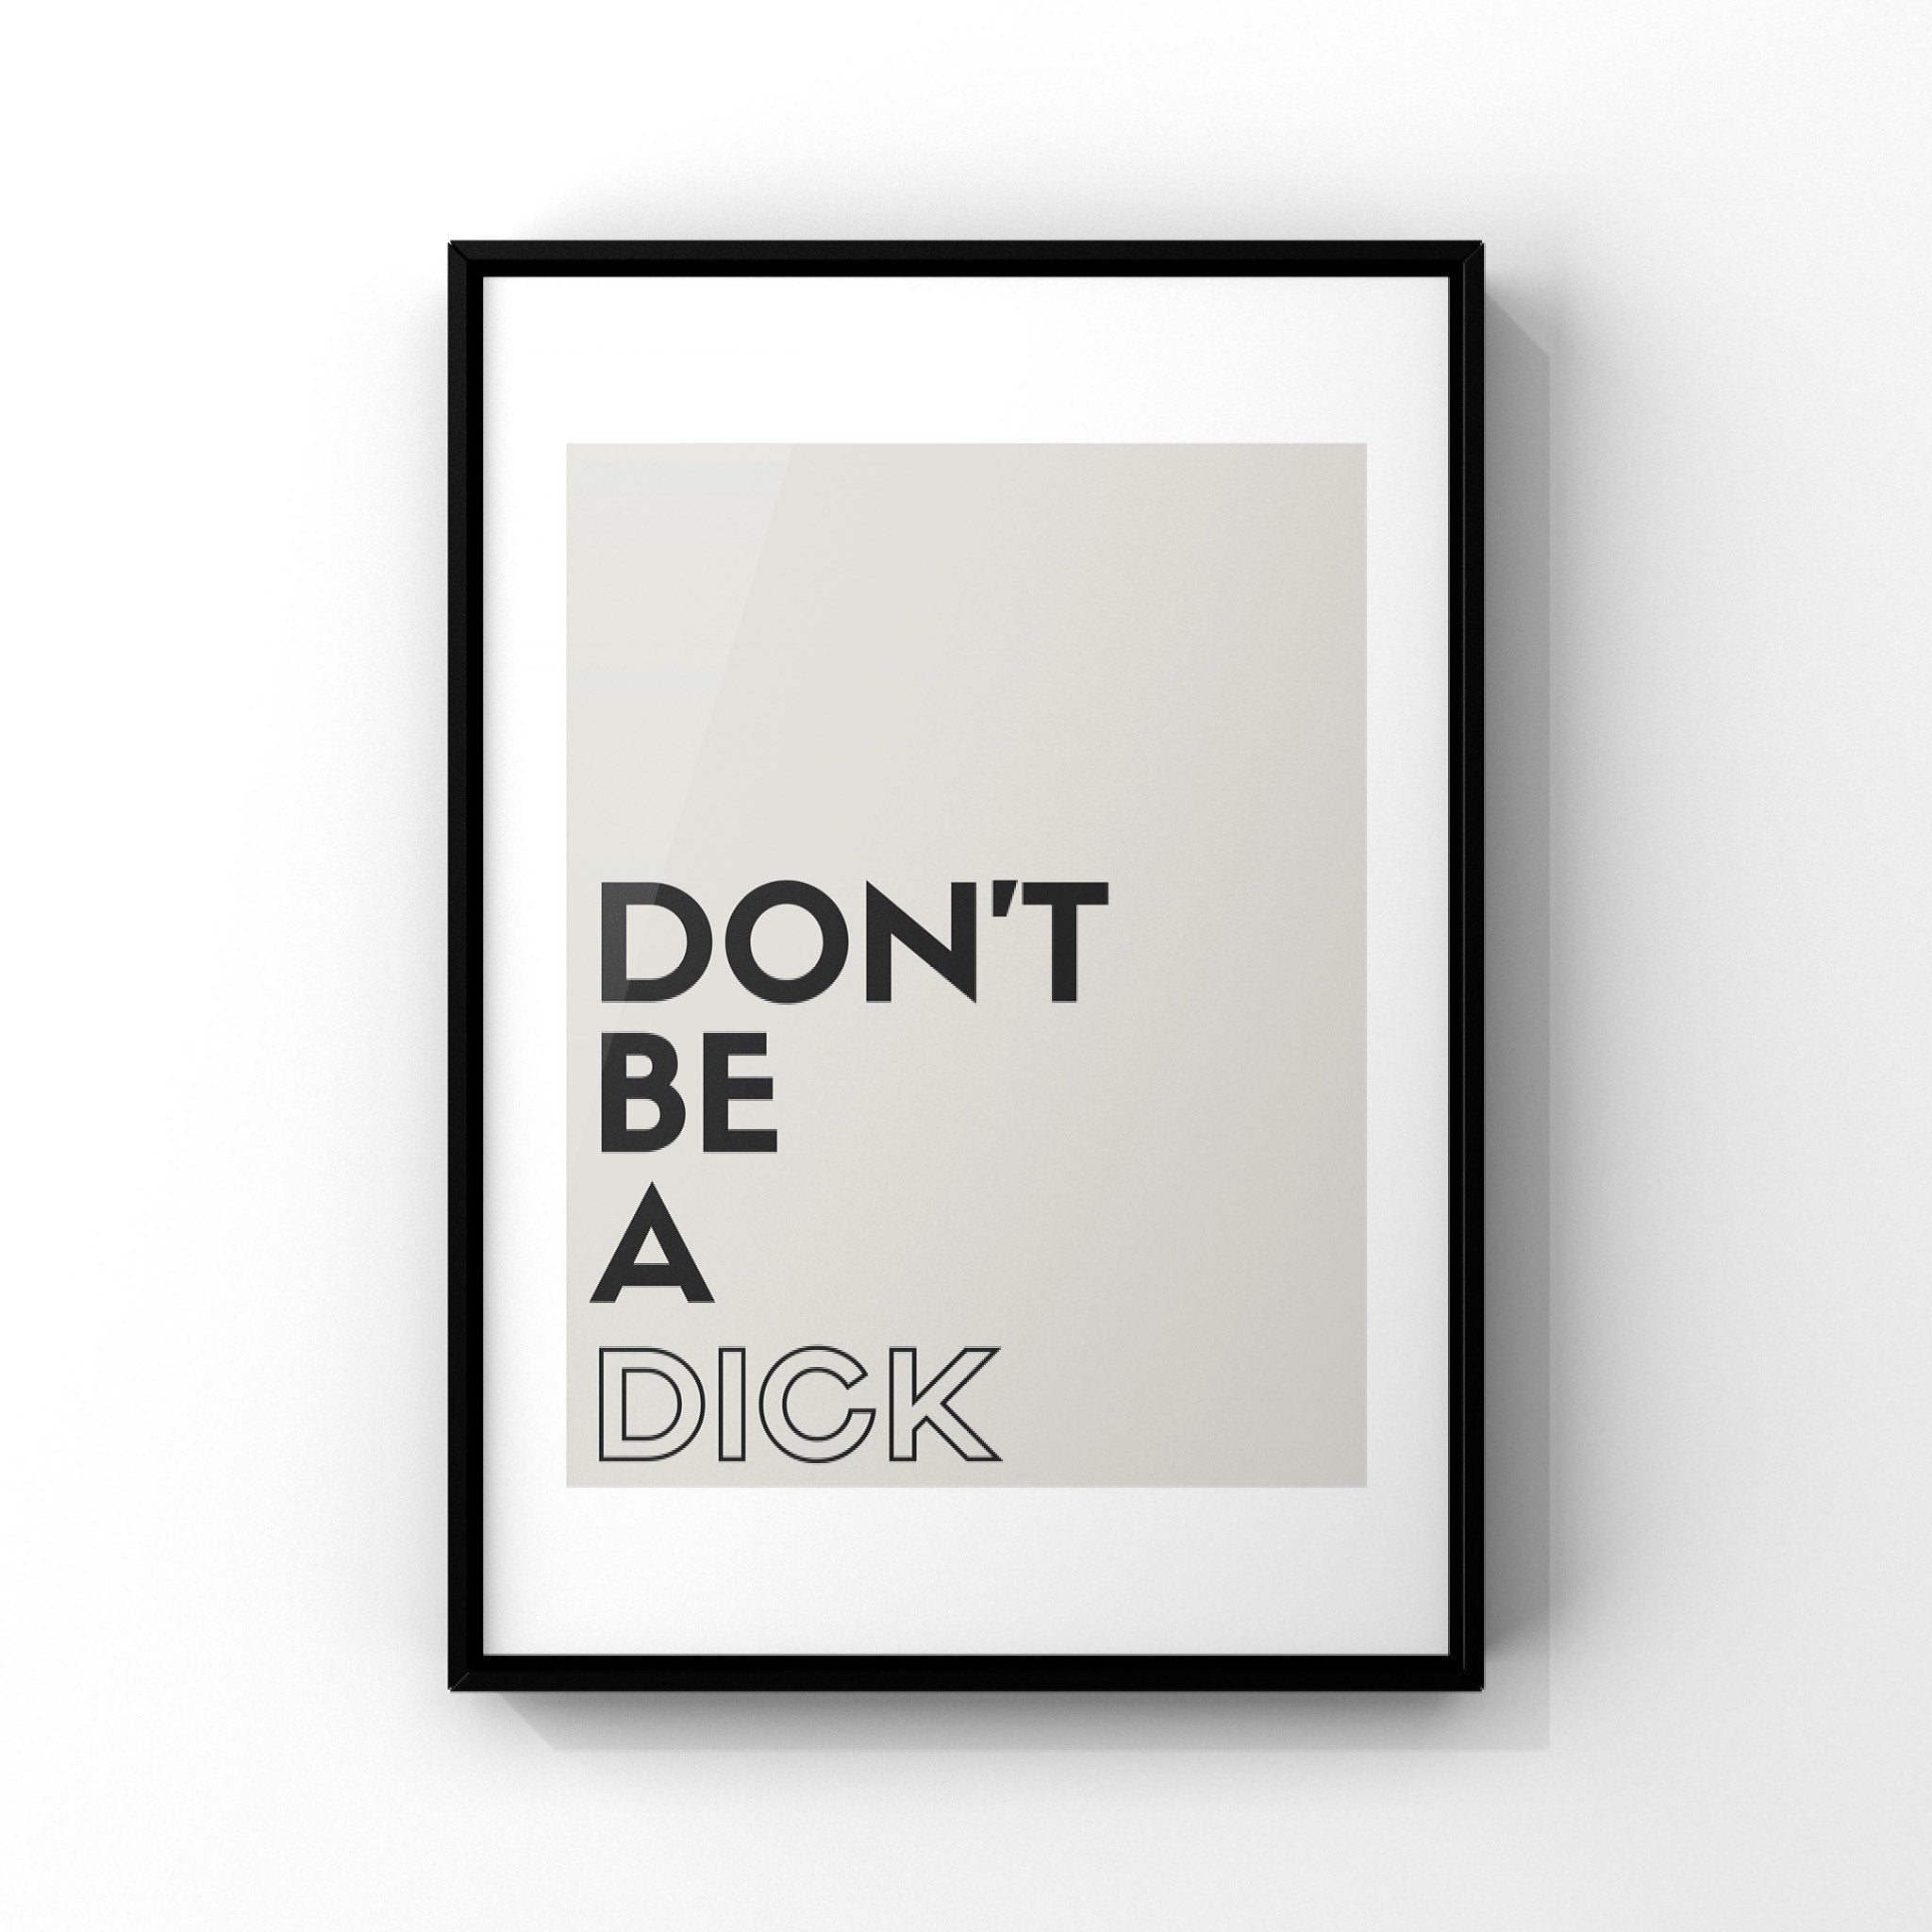 Don’t be a dick print